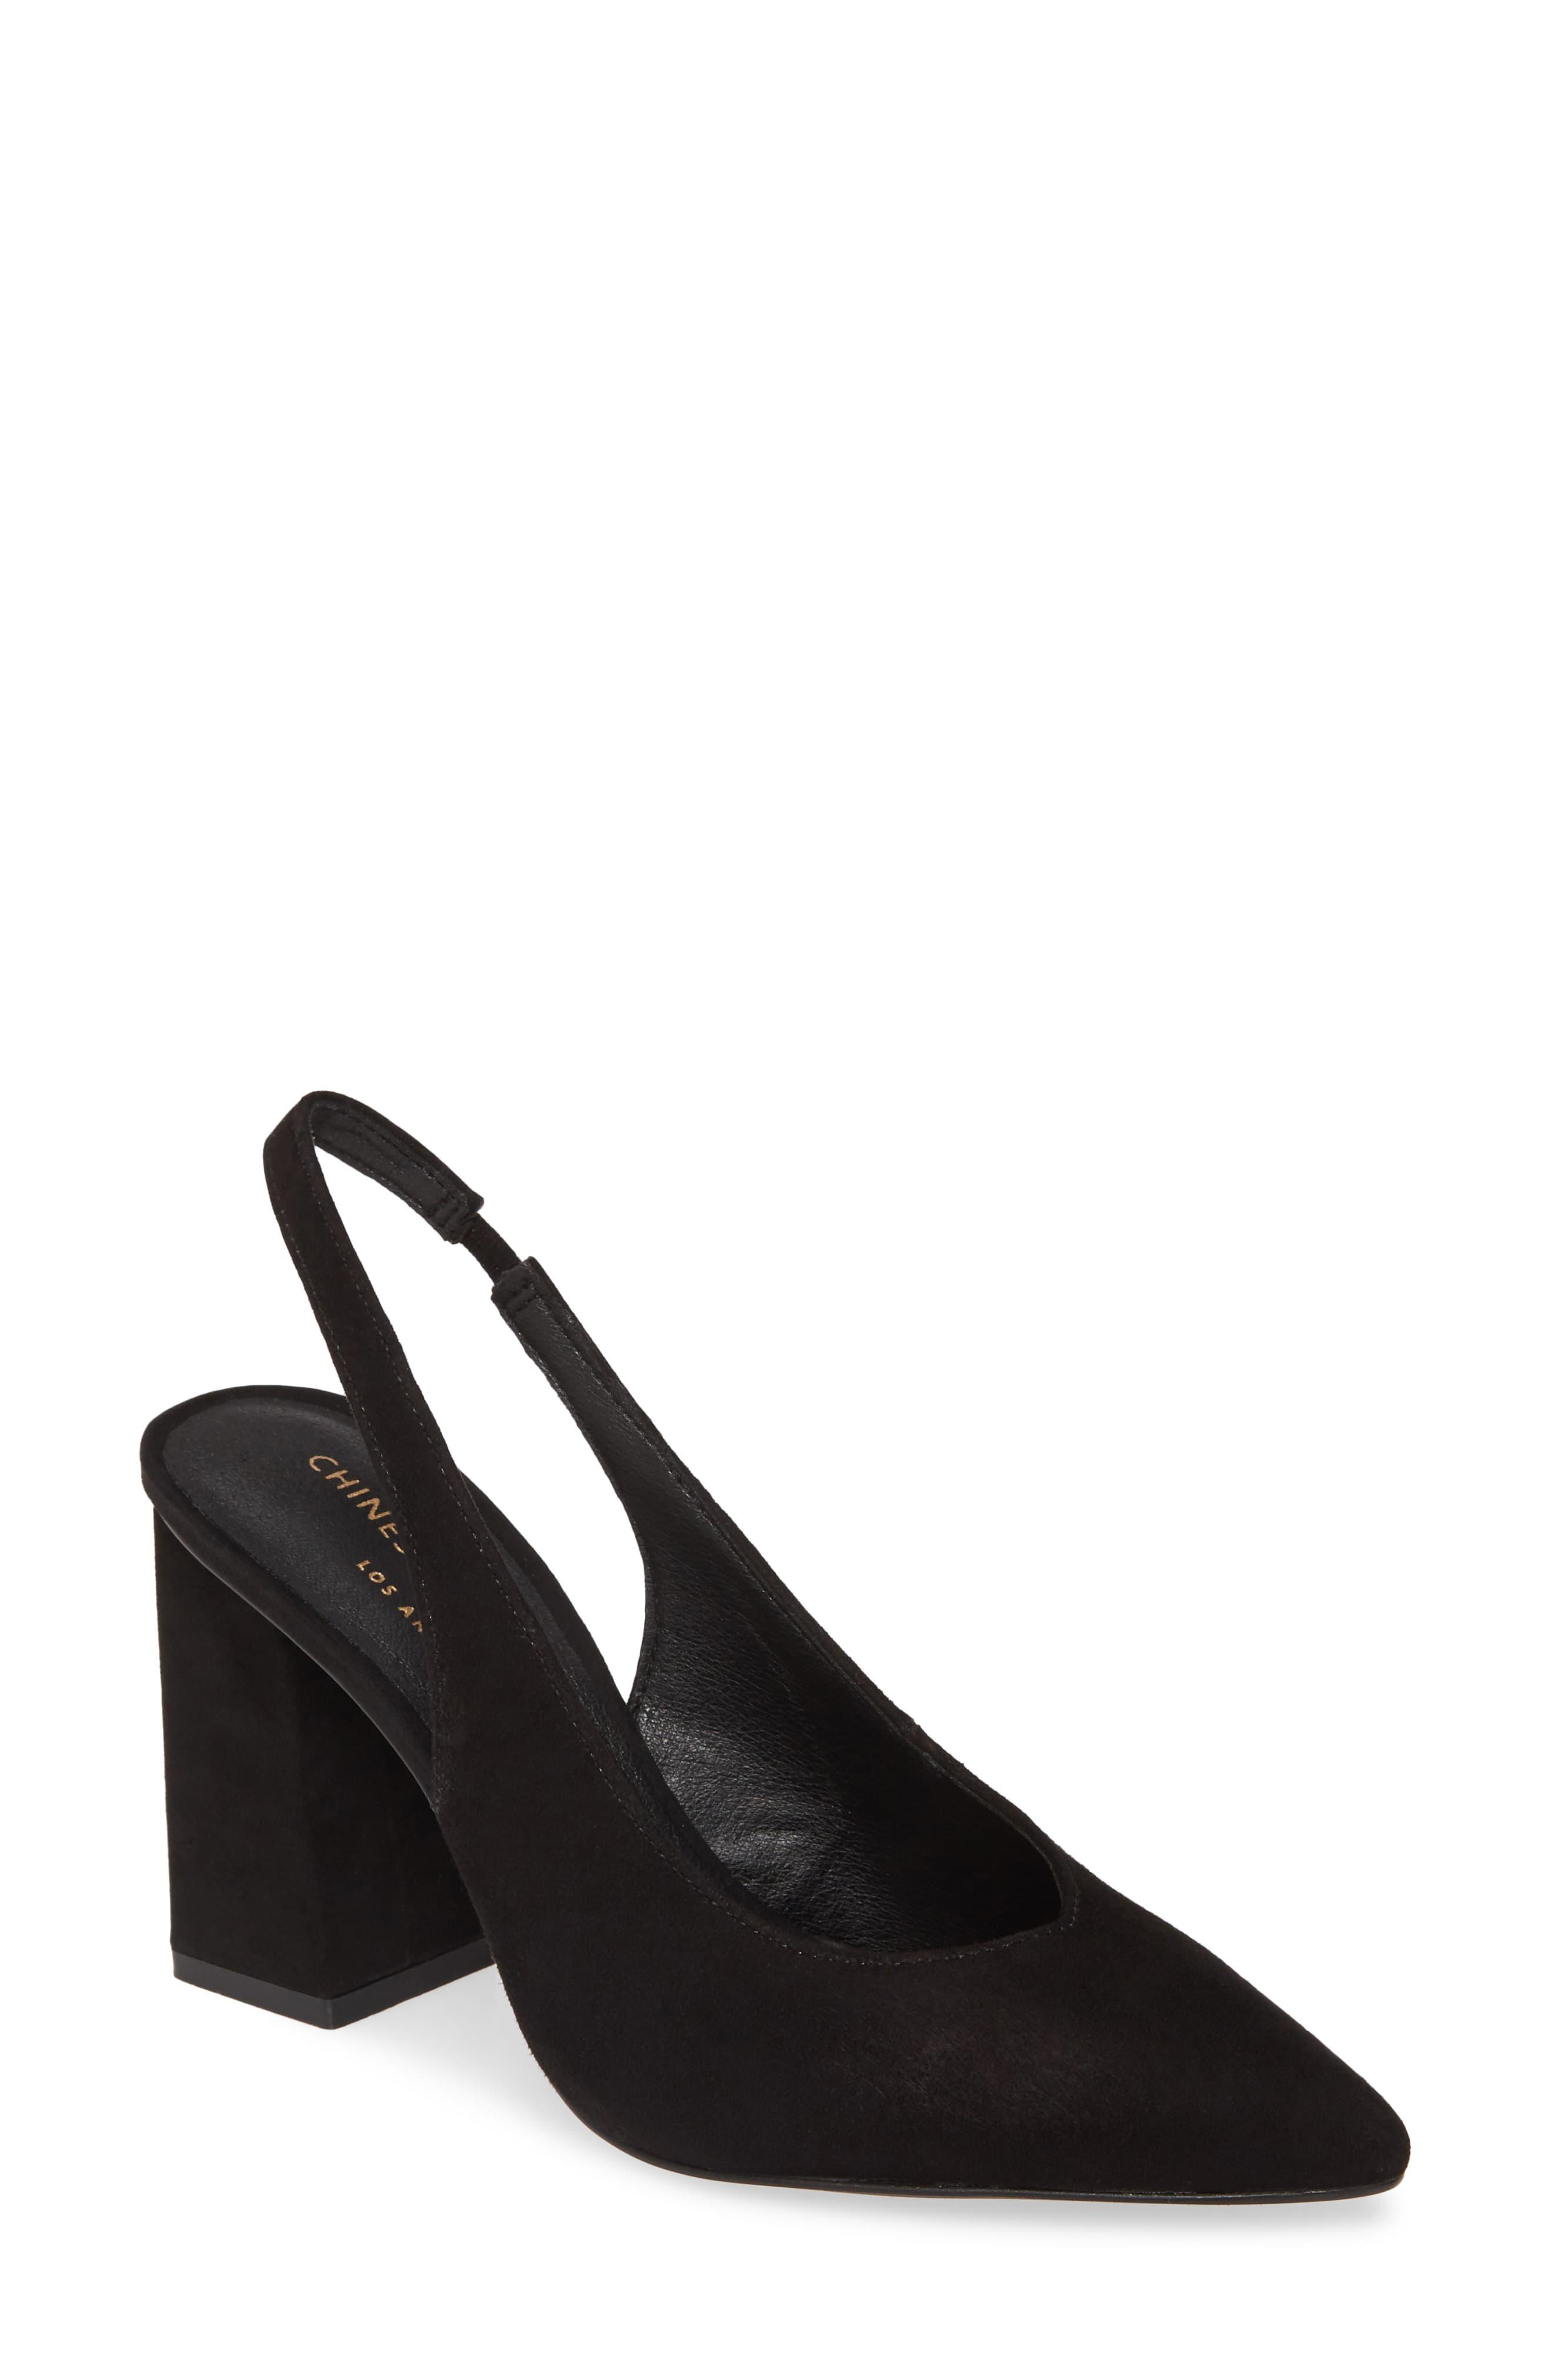 Chinese Laundry Katana Slingback Pump in Black Suede (Black) - Lyst